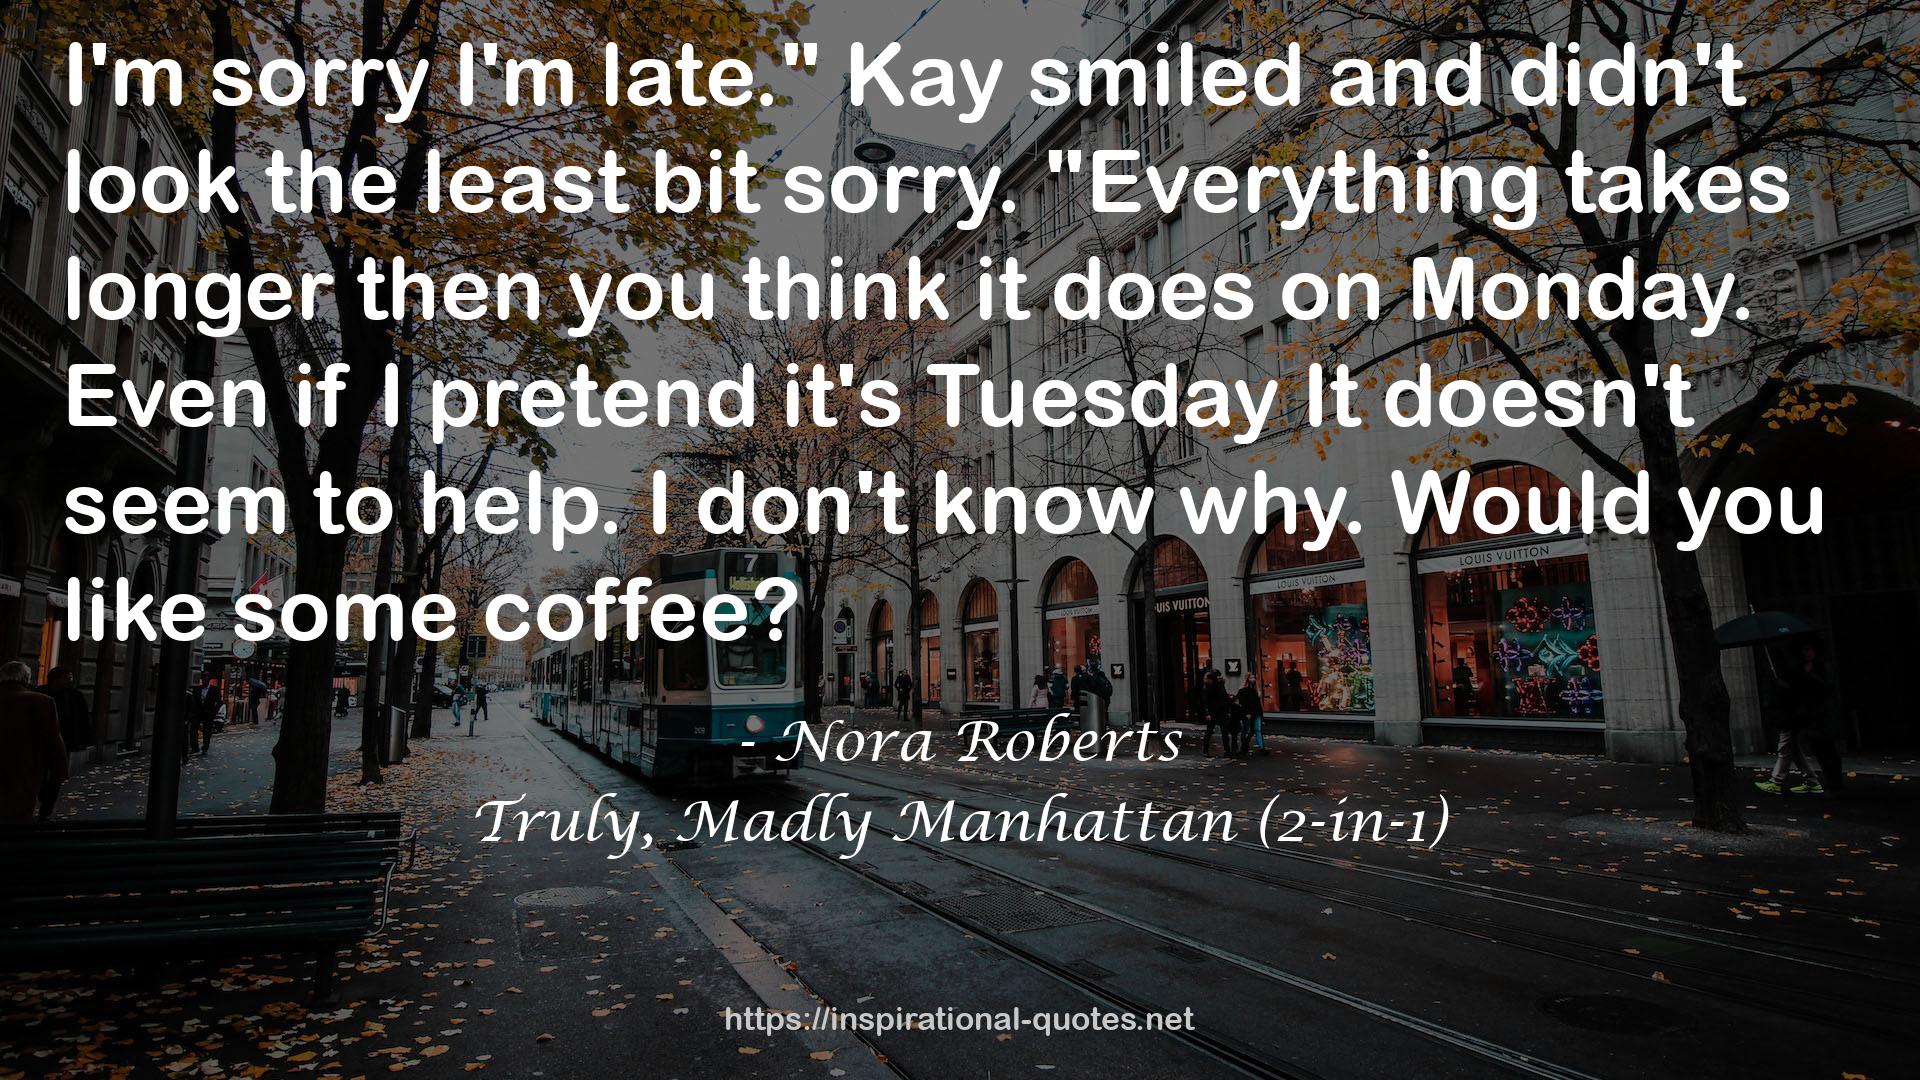 Truly, Madly Manhattan (2-in-1) QUOTES